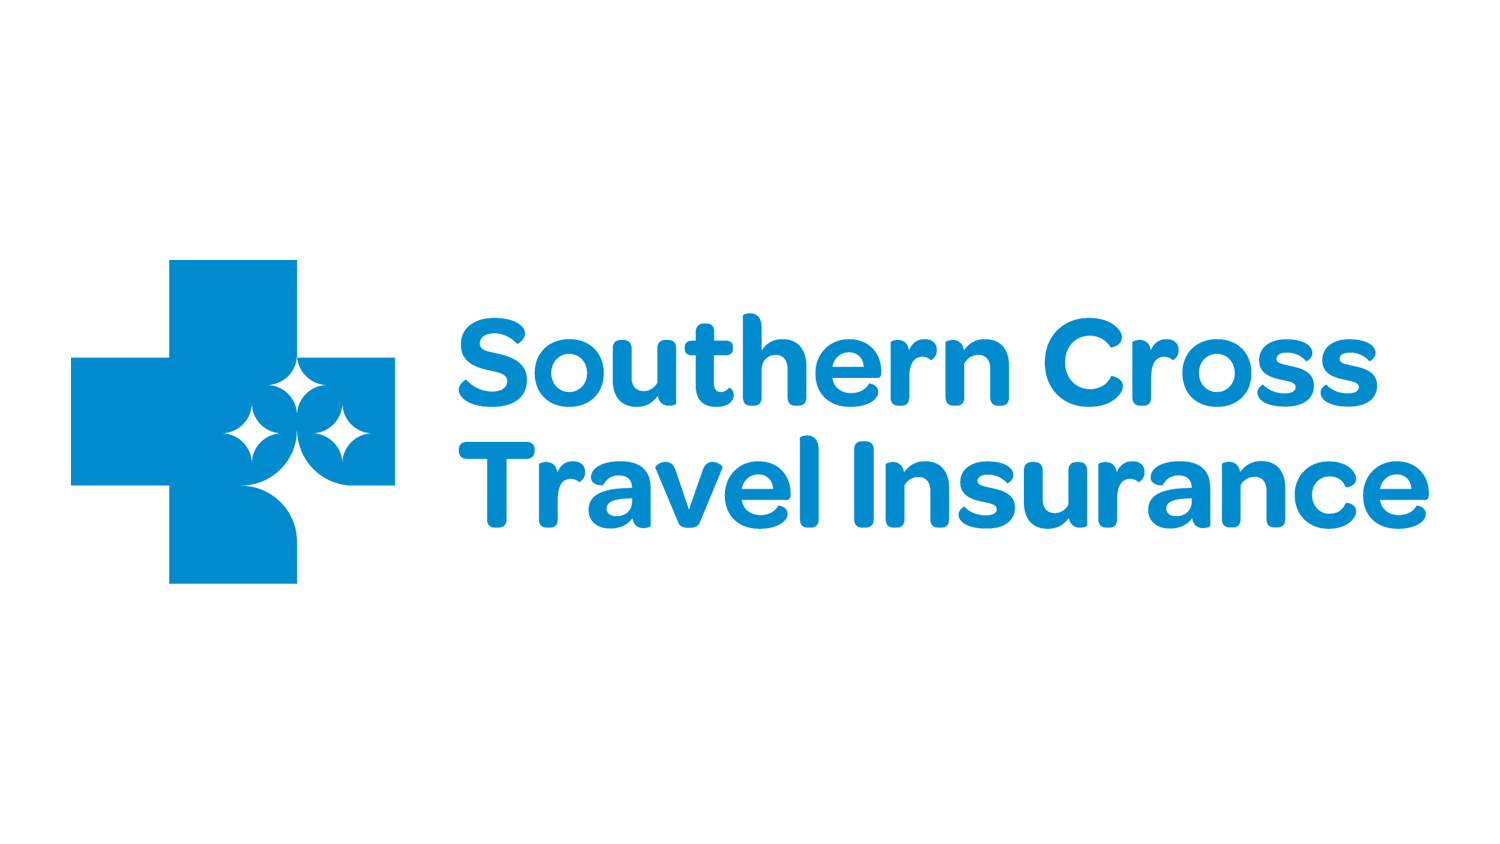 Southern Cross Travel Insurance (SCTI) Comprehensive carousel image